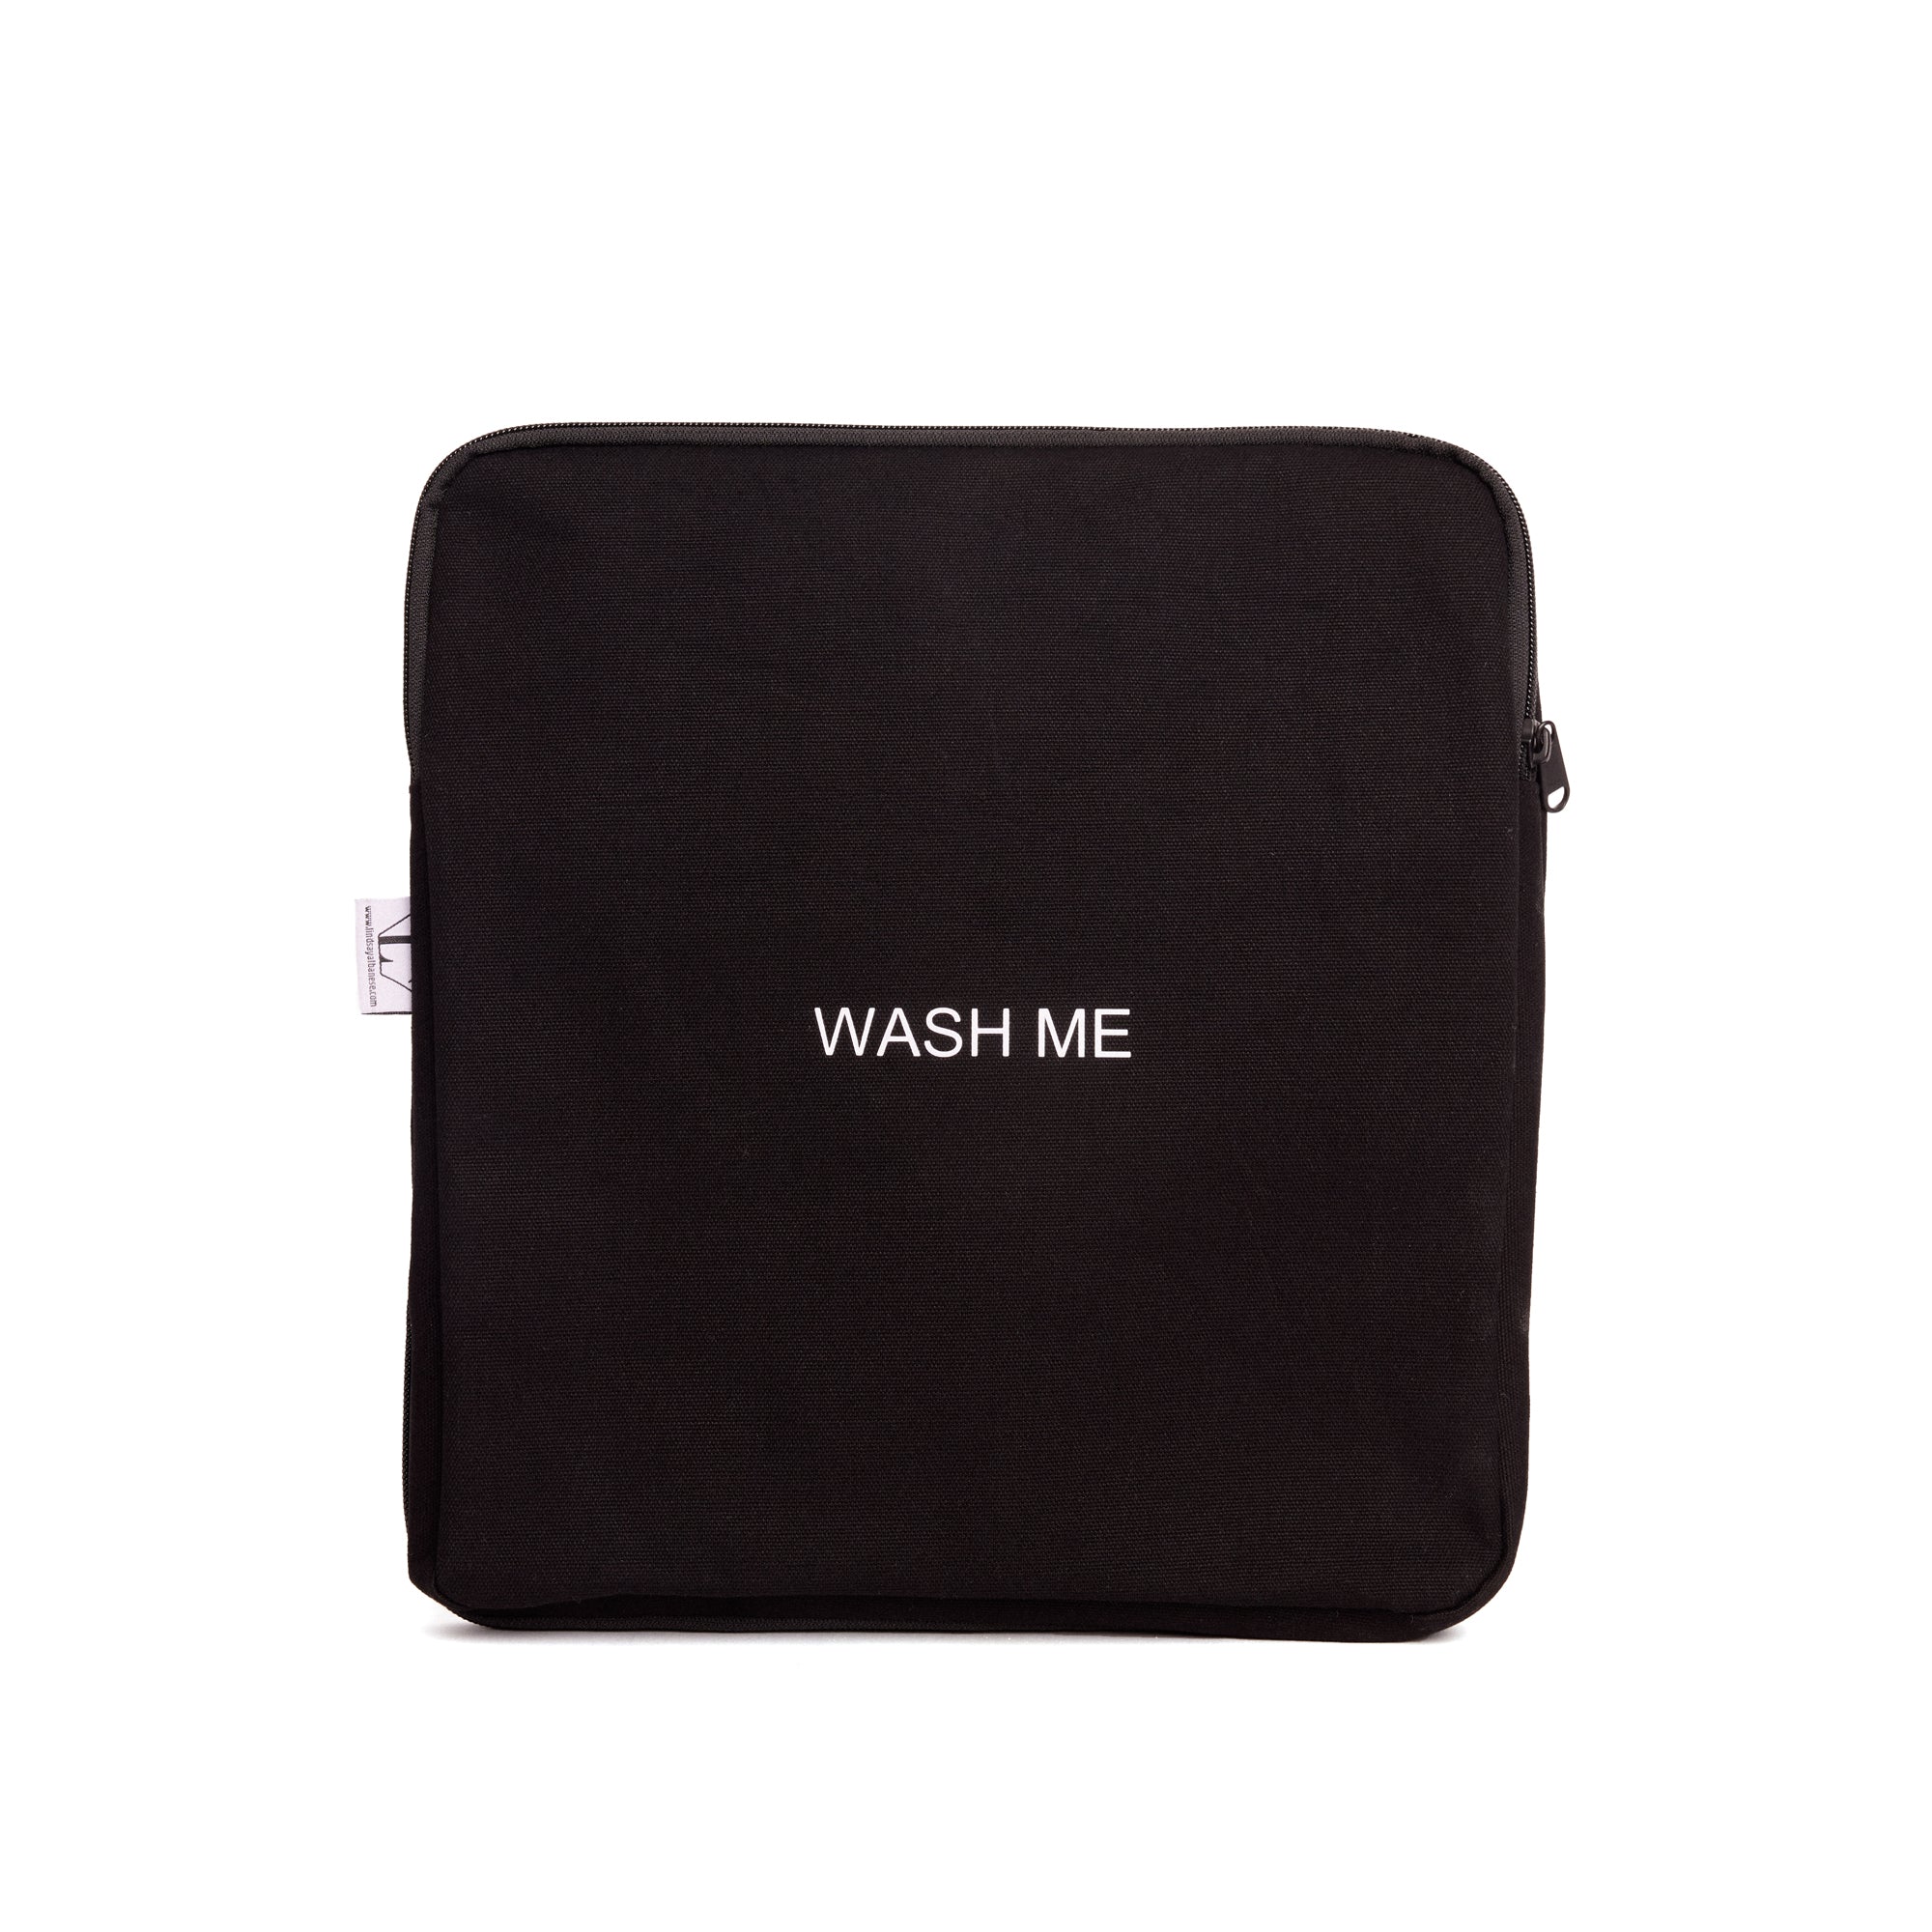 Two sided travel black laundry bag stores your clean and dirty clothes separate and in one convenient pouch when you travel